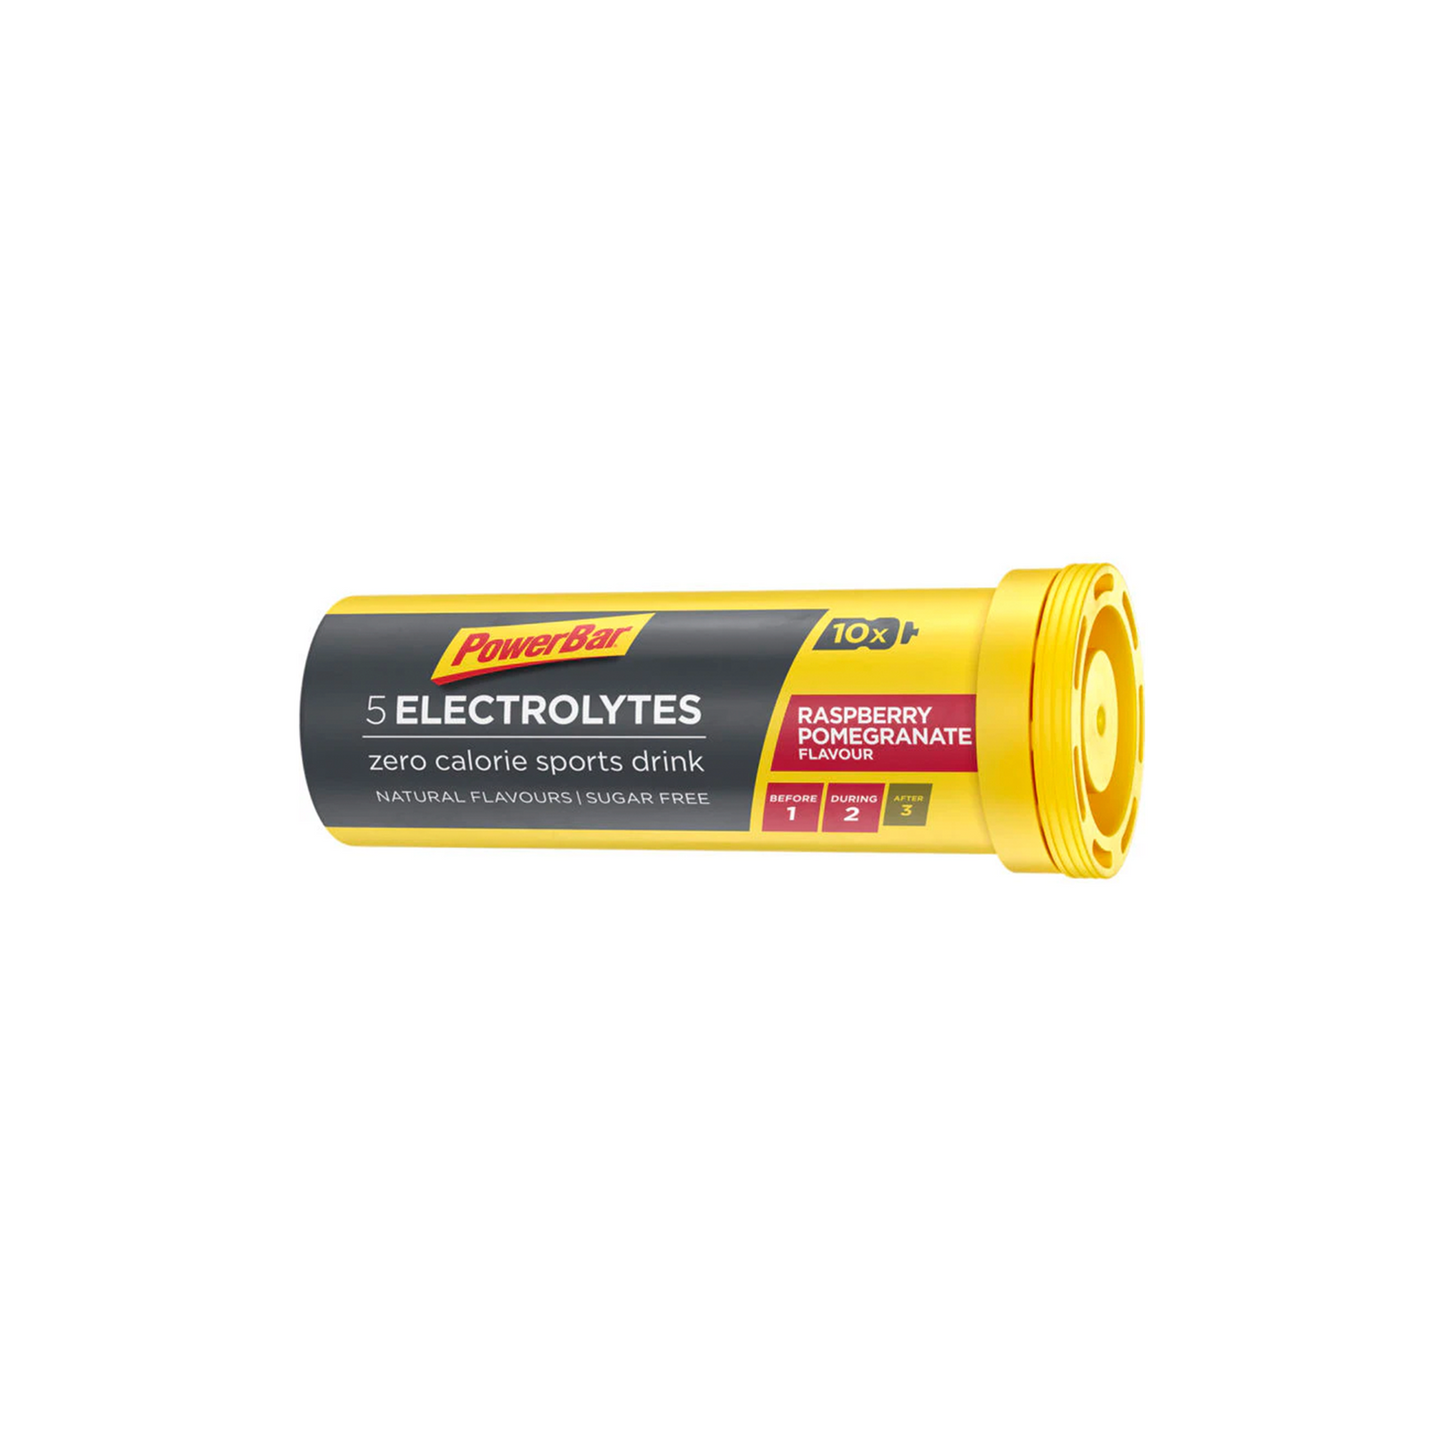 Powerbar 5 Electrolytes| Complete Cyclist - Many people taking part in sports or exercise want to have a sports drink that doesn’t provide any additional carbohydrates. This may be to optimize their fat metabolism or to cut down their overall calorie intake. 